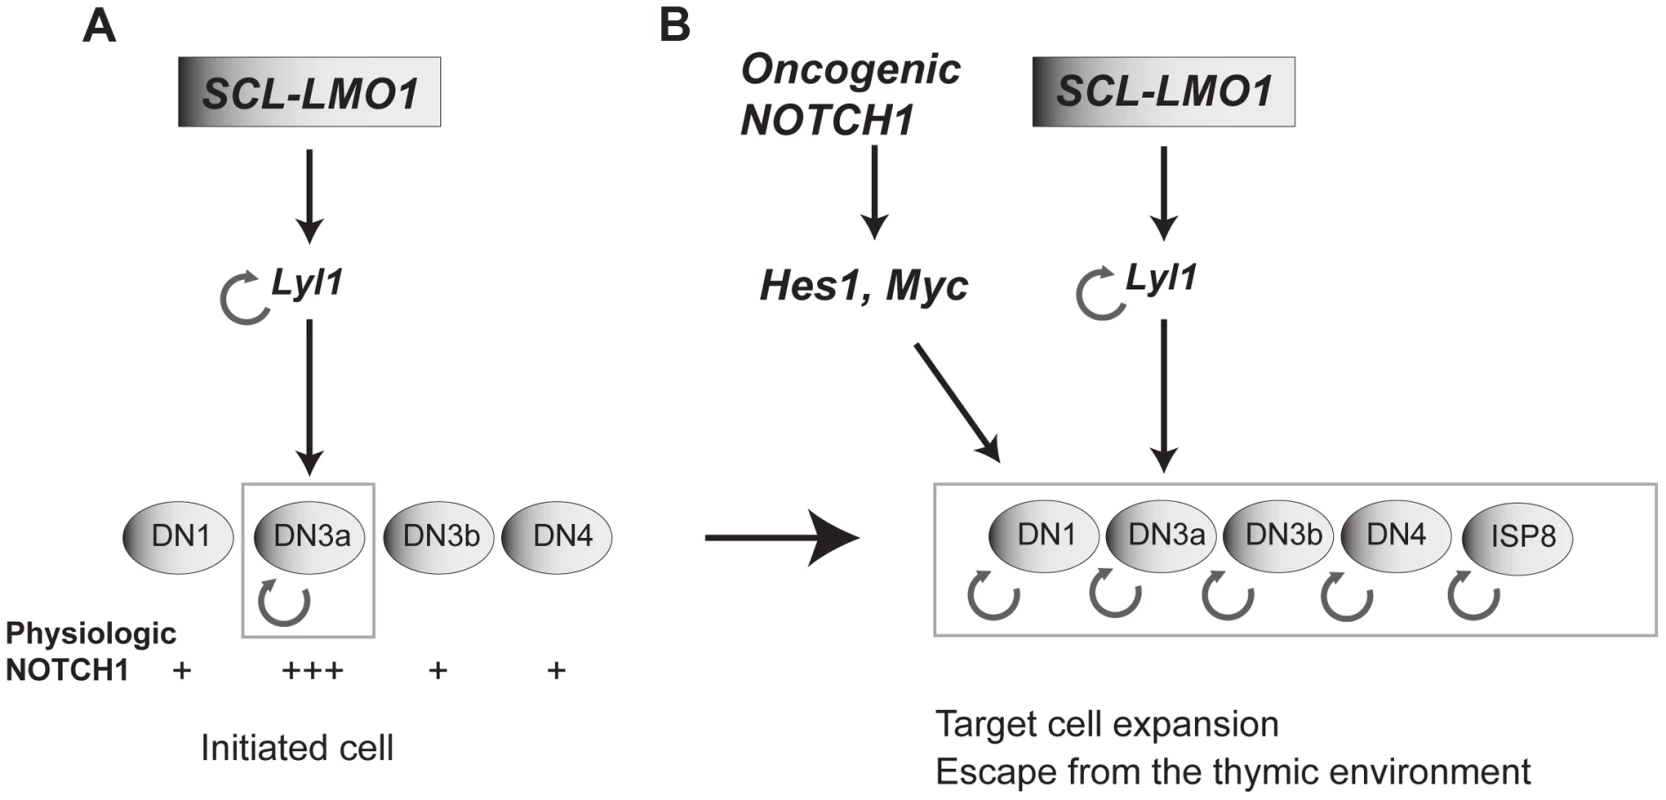 Model of the collaboration between the SCL, LMO1 and <i>Notch1</i> oncogenes.